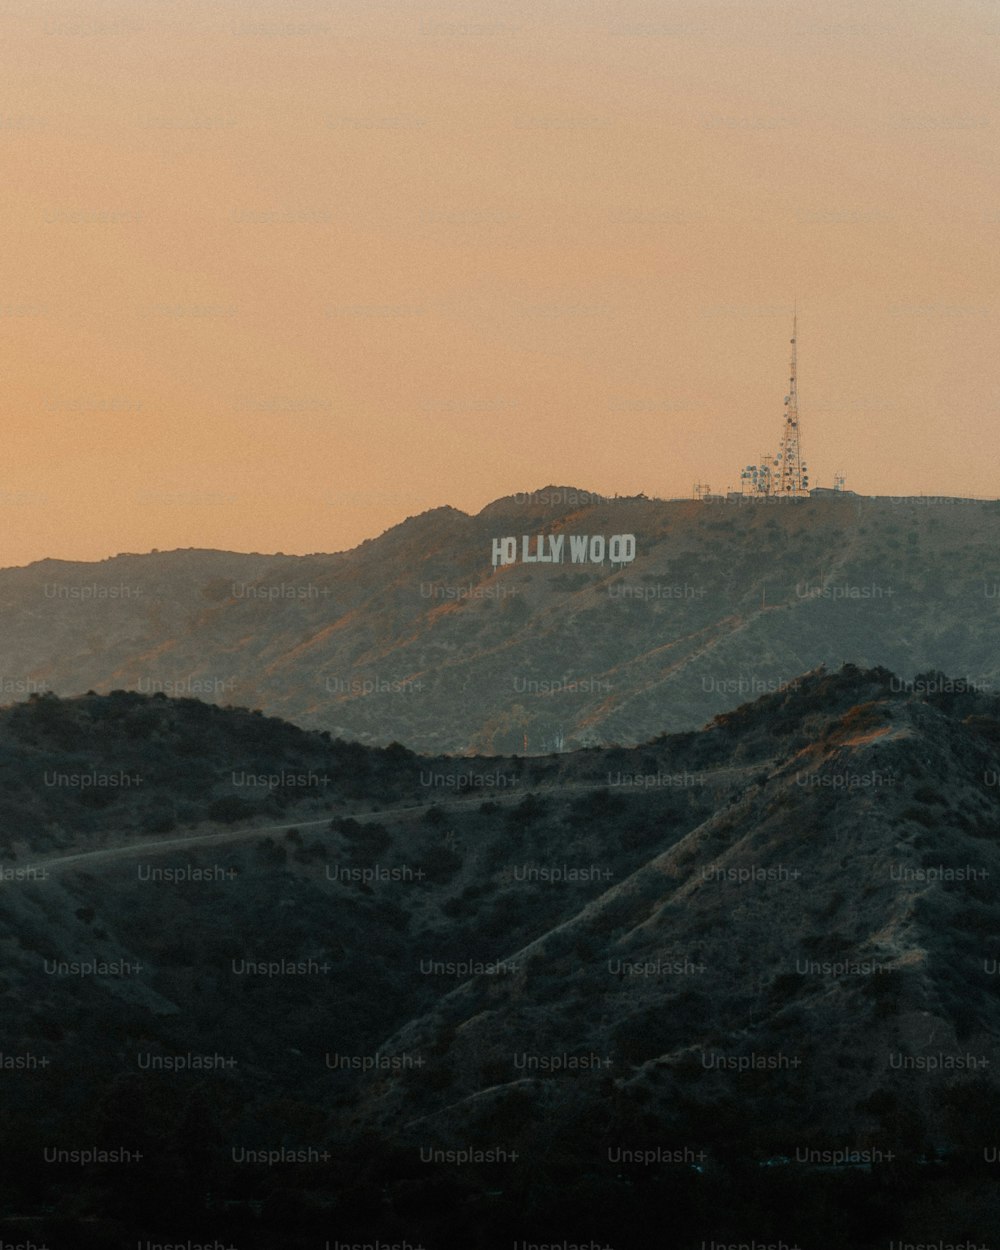 The iconic Hollywood Sign in Los Angeles, California